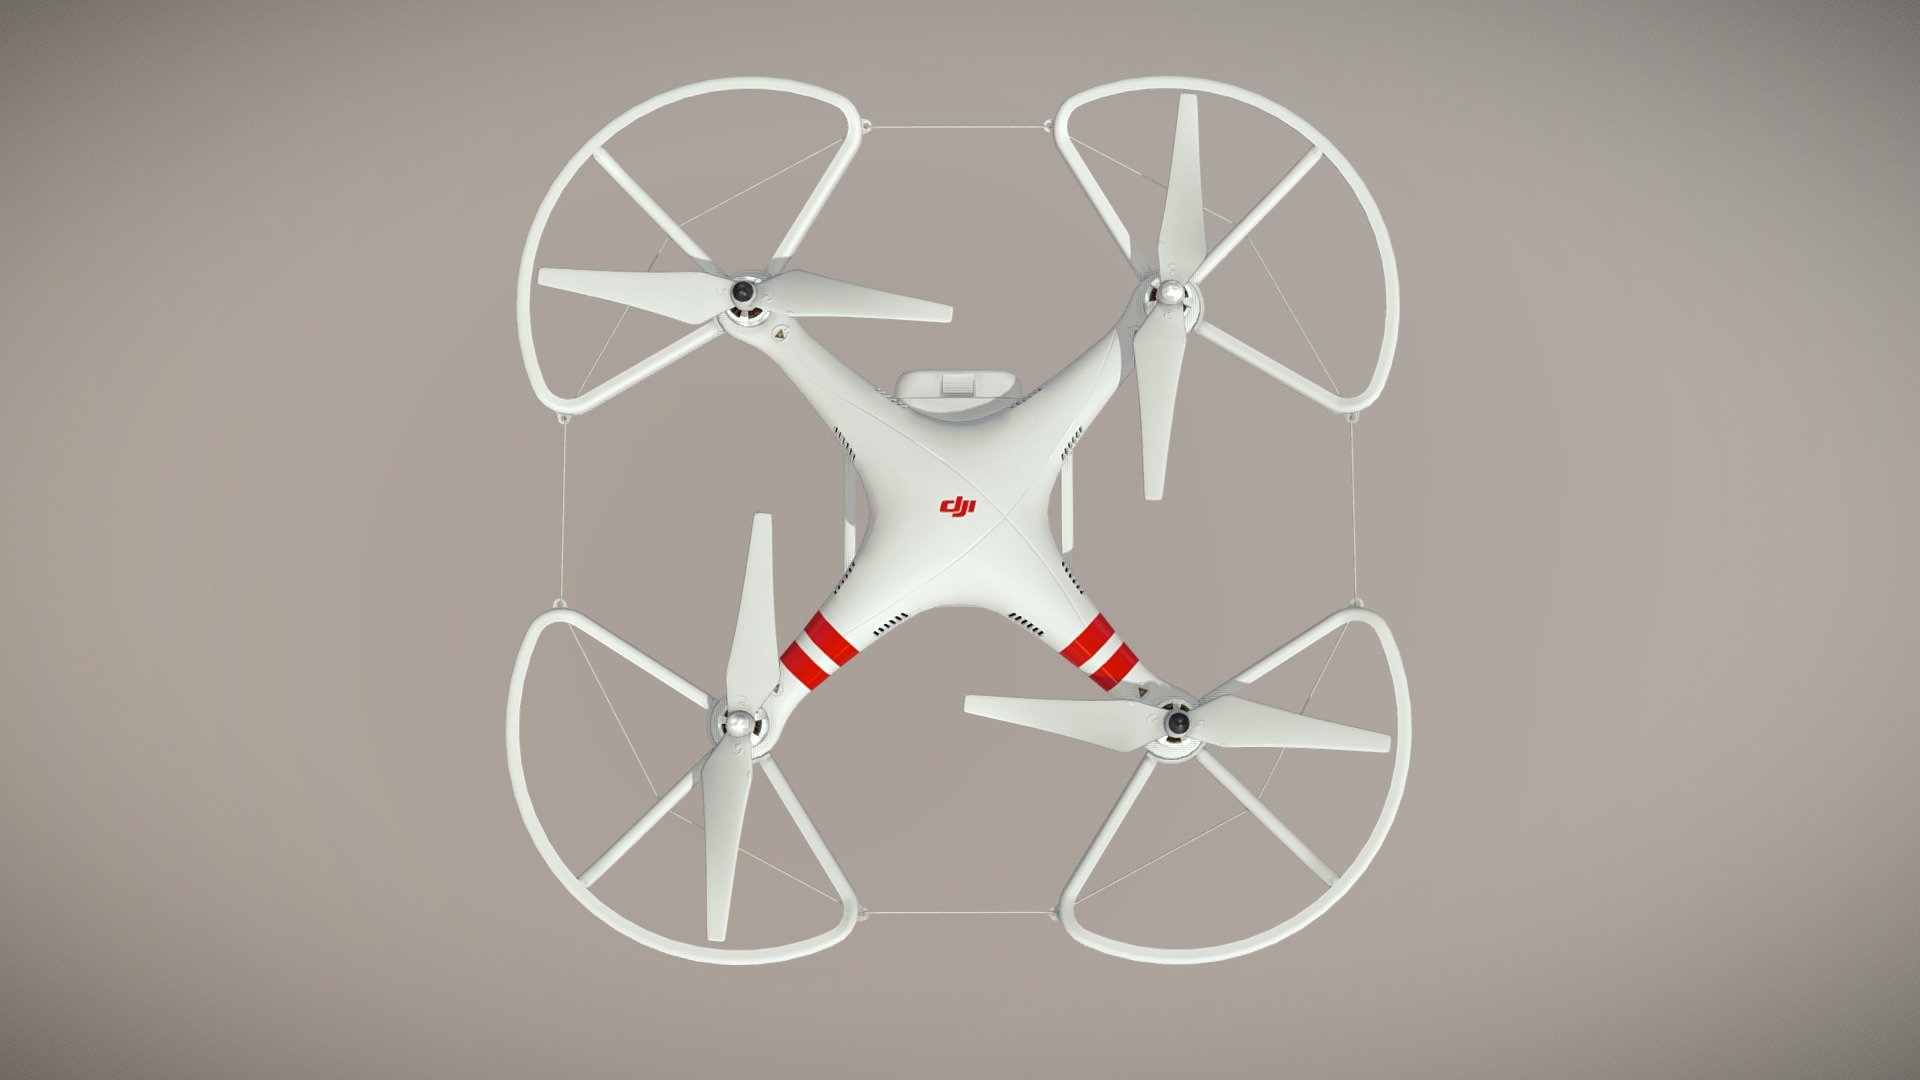 •   Let me present to you high-quality low-poly 3D model DJI Phantom 2 Quadcopter with Propeller Guard without camera. Modeling was made with ortho-photos of real quadcopter that is why all details of design are recreated most authentically.

•    This model consists of a few meshes, it is low-polygonal and it has only one material.

•   The total of the main textures is 5. Resolution of all textures is 4096 pixels square aspect ratio in .png format. Also there is original texture file .PSD format in separate archive.

•   Polygon count of the model is – 16756.

•   The model has correct dimensions in real-world scale. All parts grouped and named correctly.

•   To use the model in other 3D programs there are scenes saved in formats .fbx, .obj, .DAE, .max (2010 version).

Note: If you see some artifacts on the textures, it means compression works in the Viewer. We recommend setting HD quality for textures. But anyway, original textures have no artifacts 3d model